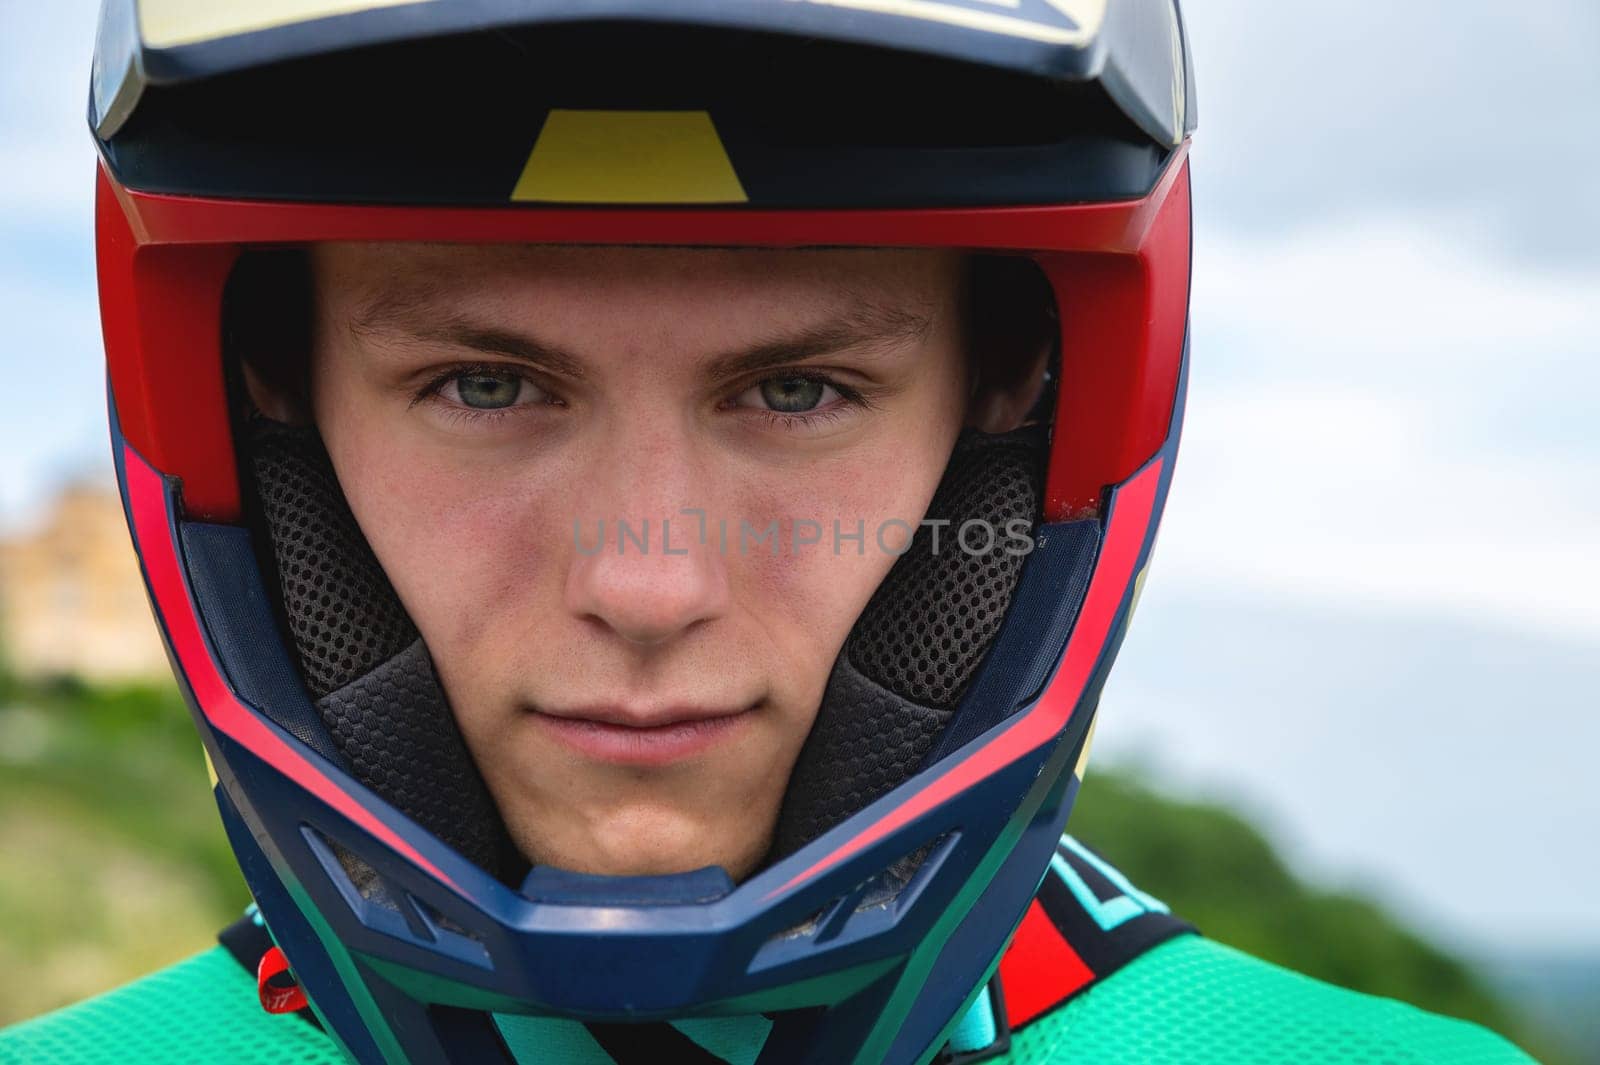 Close-up portrait of a confident handsome young athlete wearing a stylish helmet looking at the camera with eyes full of determination, ready to race on a summer day outdoors.